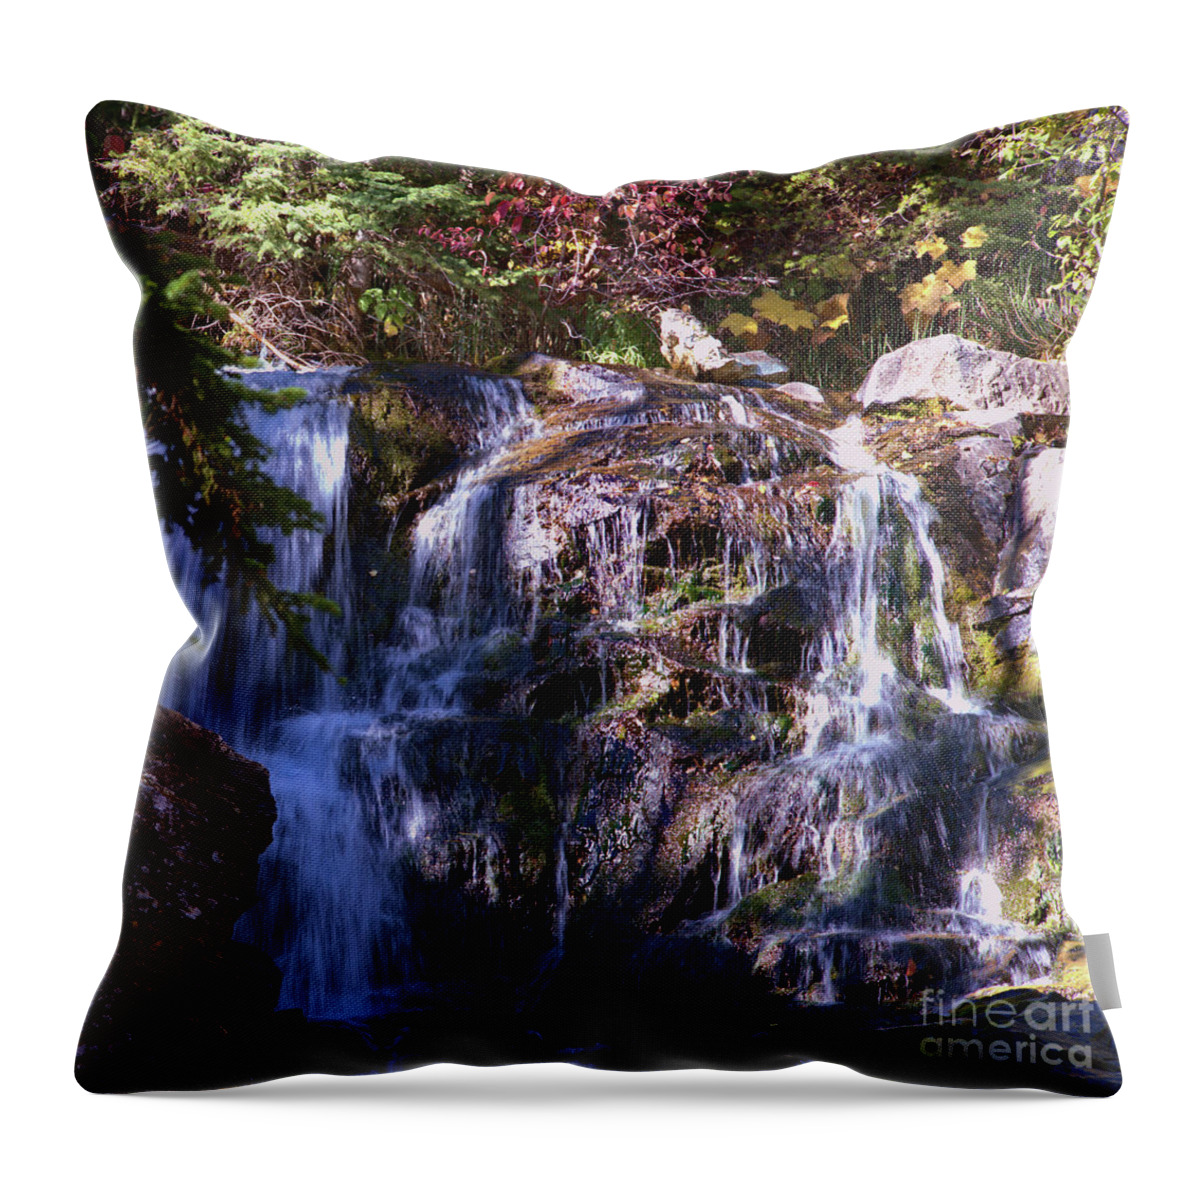 Waterfall Throw Pillow featuring the photograph Lost Creek Waterfall by Kae Cheatham